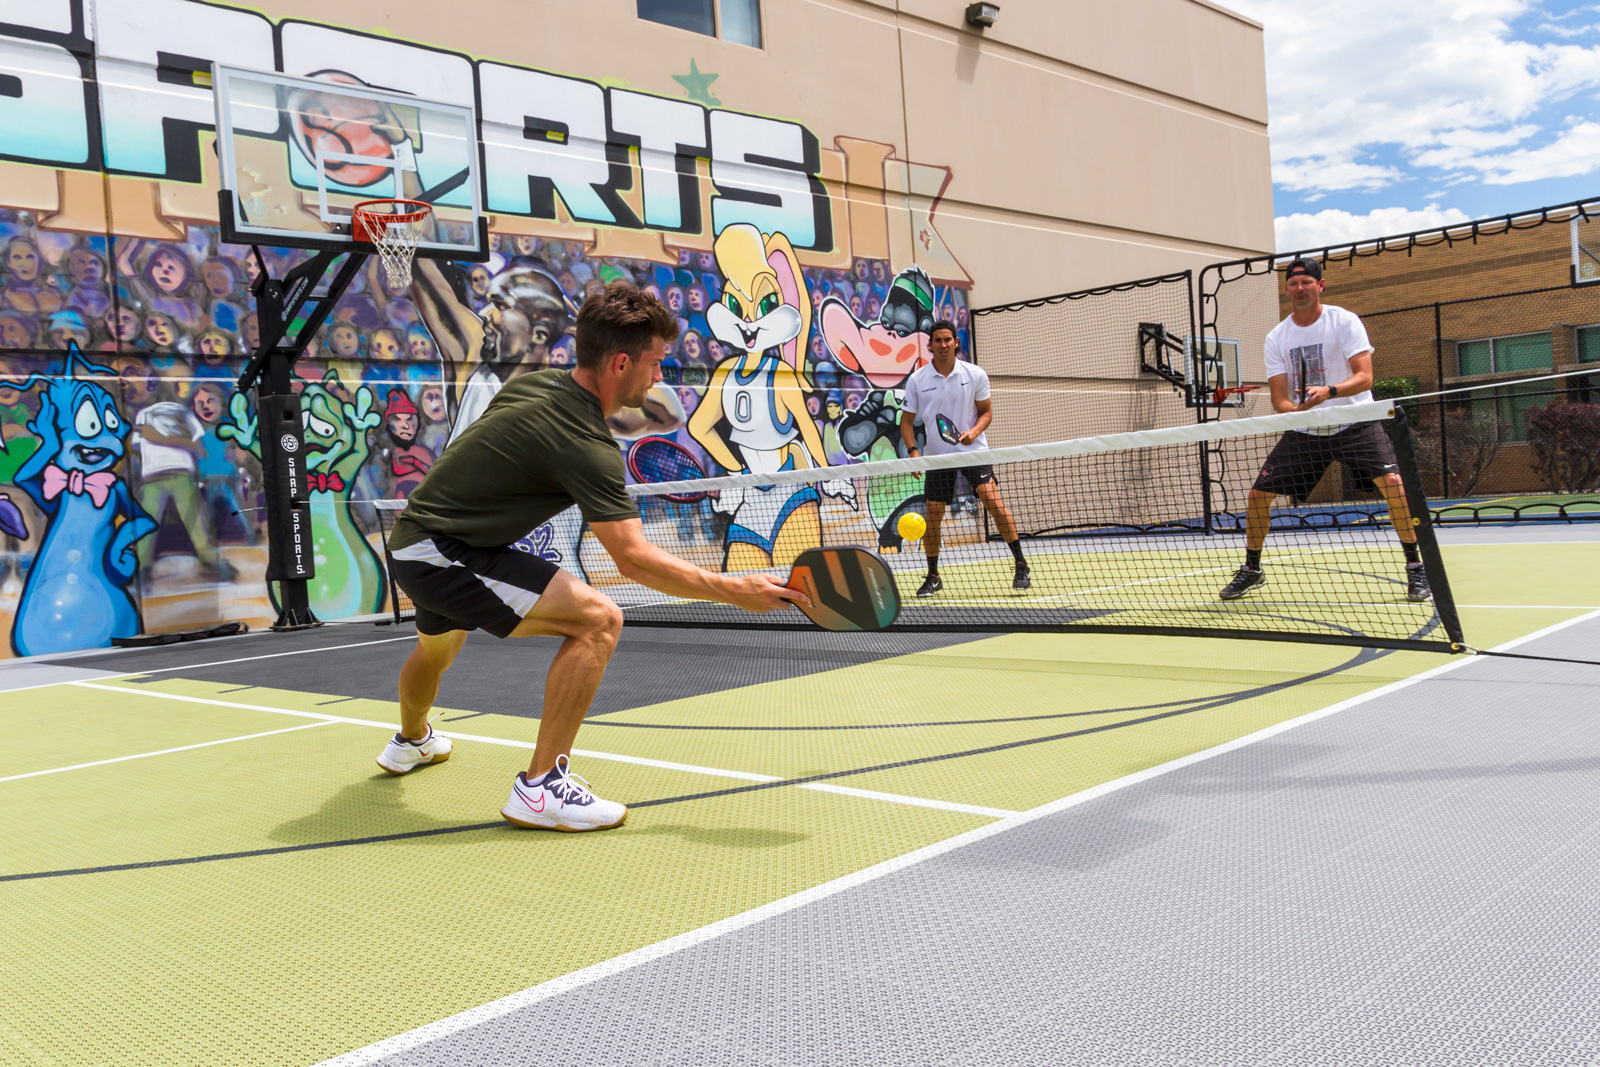 Tyler Loong and friends play Pickleball on the new Outdoor Revolution PS surfacing.